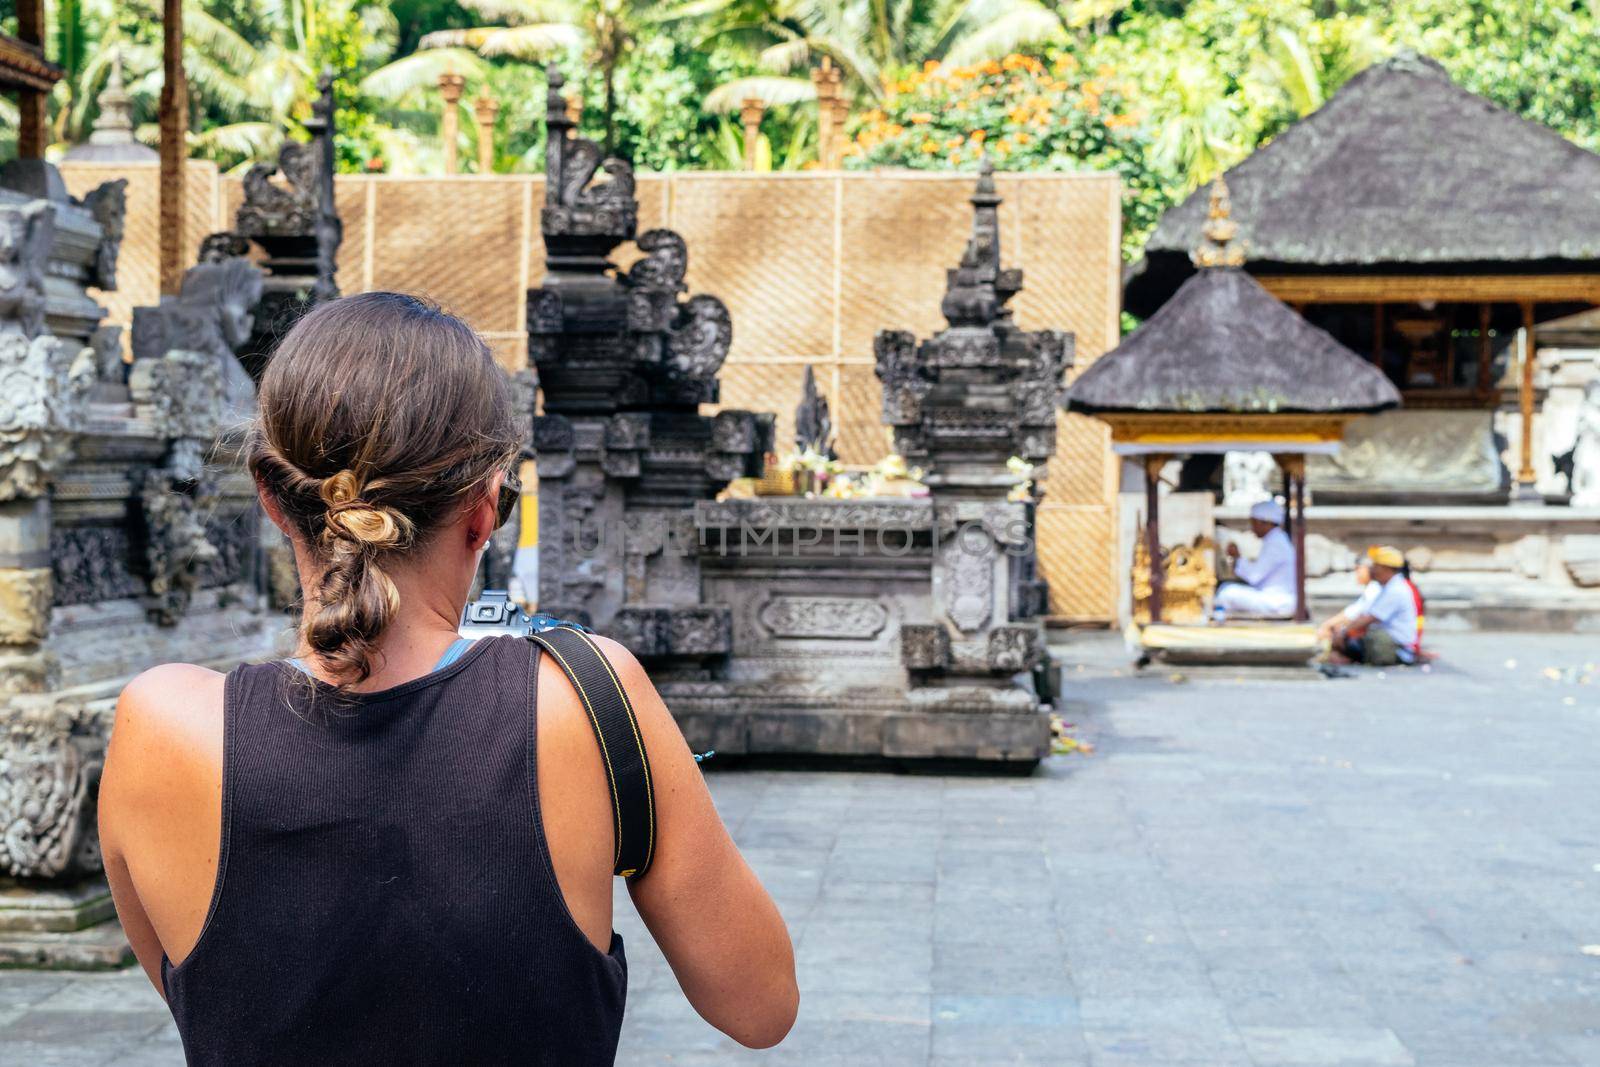 Unrecognizable tourist woman taking photos at Tirta Empul temple in Bali, Indonesia